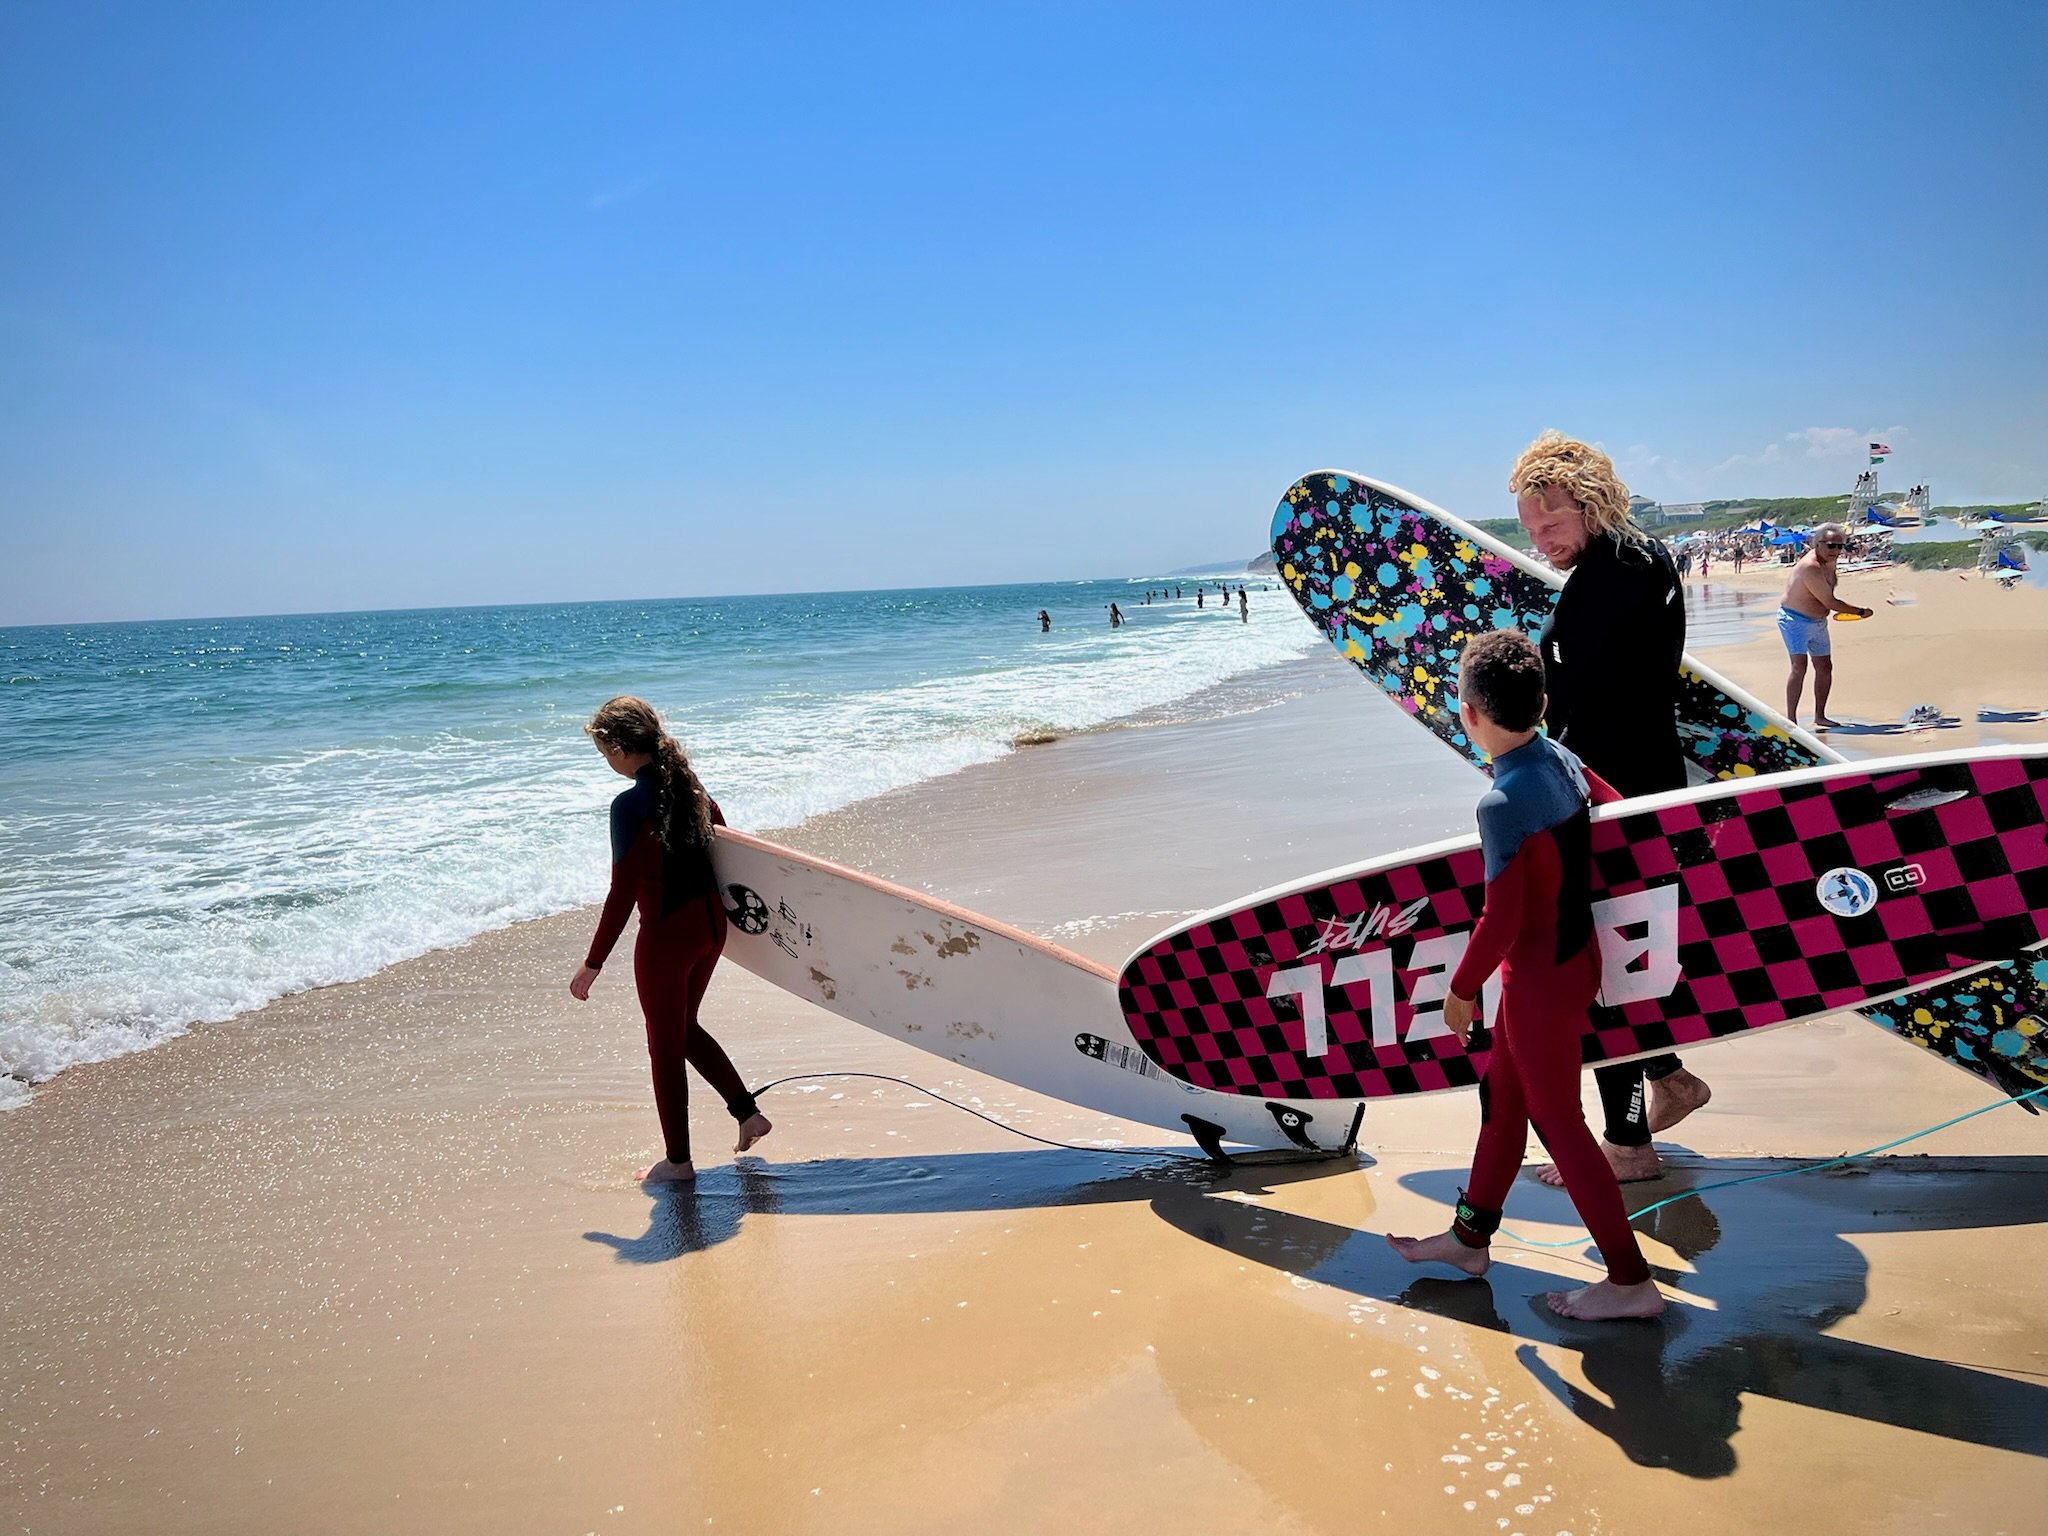 Surf's Up: The Central Coast Surf Spots to Add to Your Itinerary